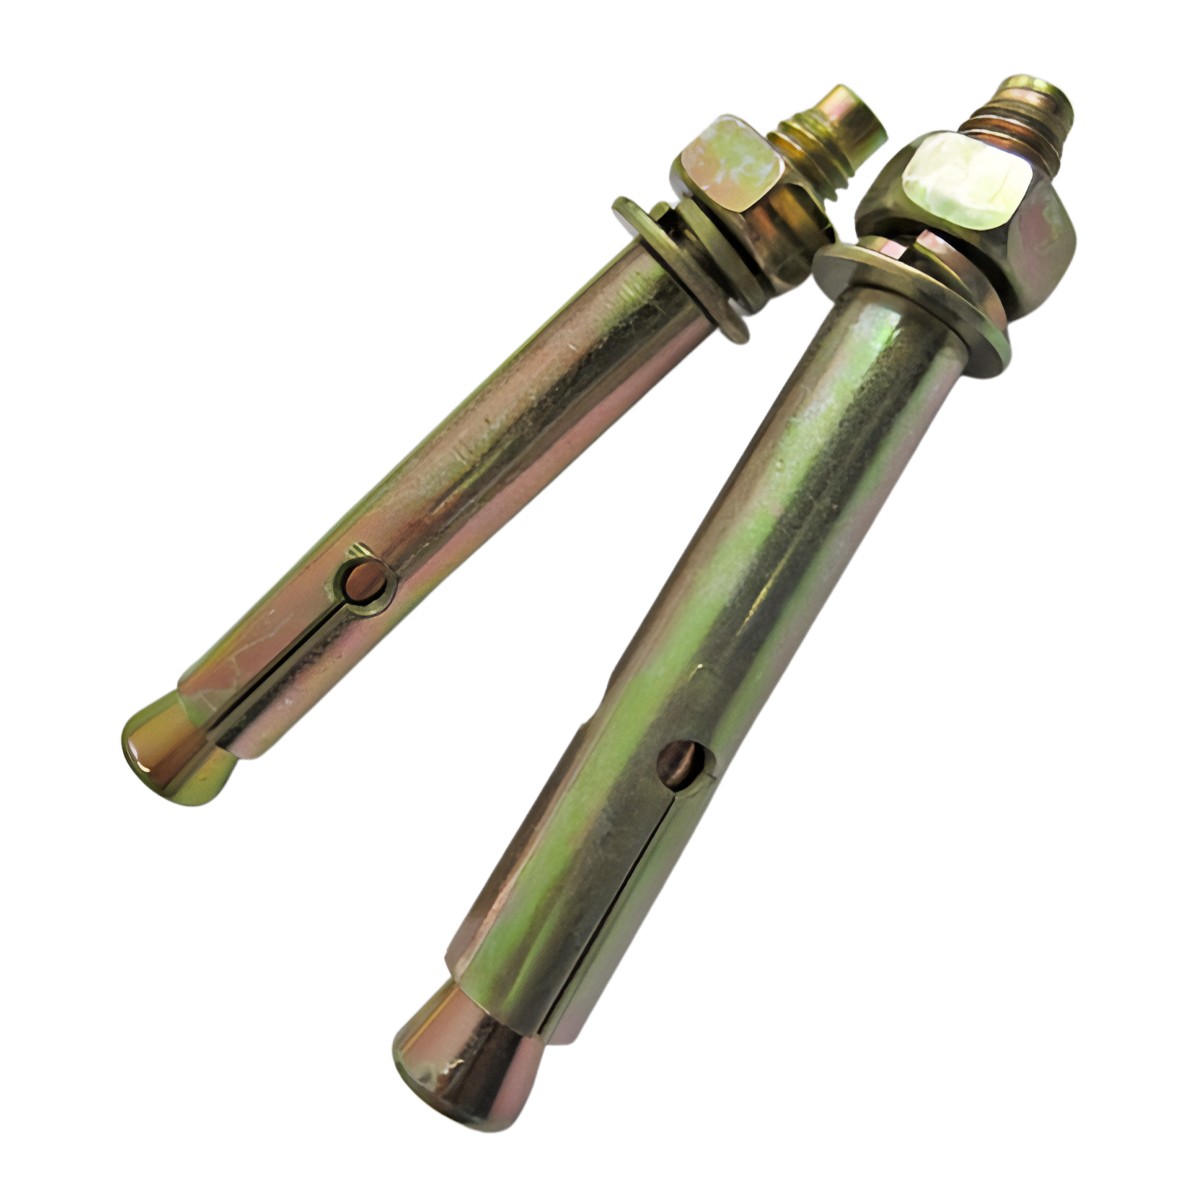 SLEEVE ANCHORS HEX FLUNGE NUT 16MM